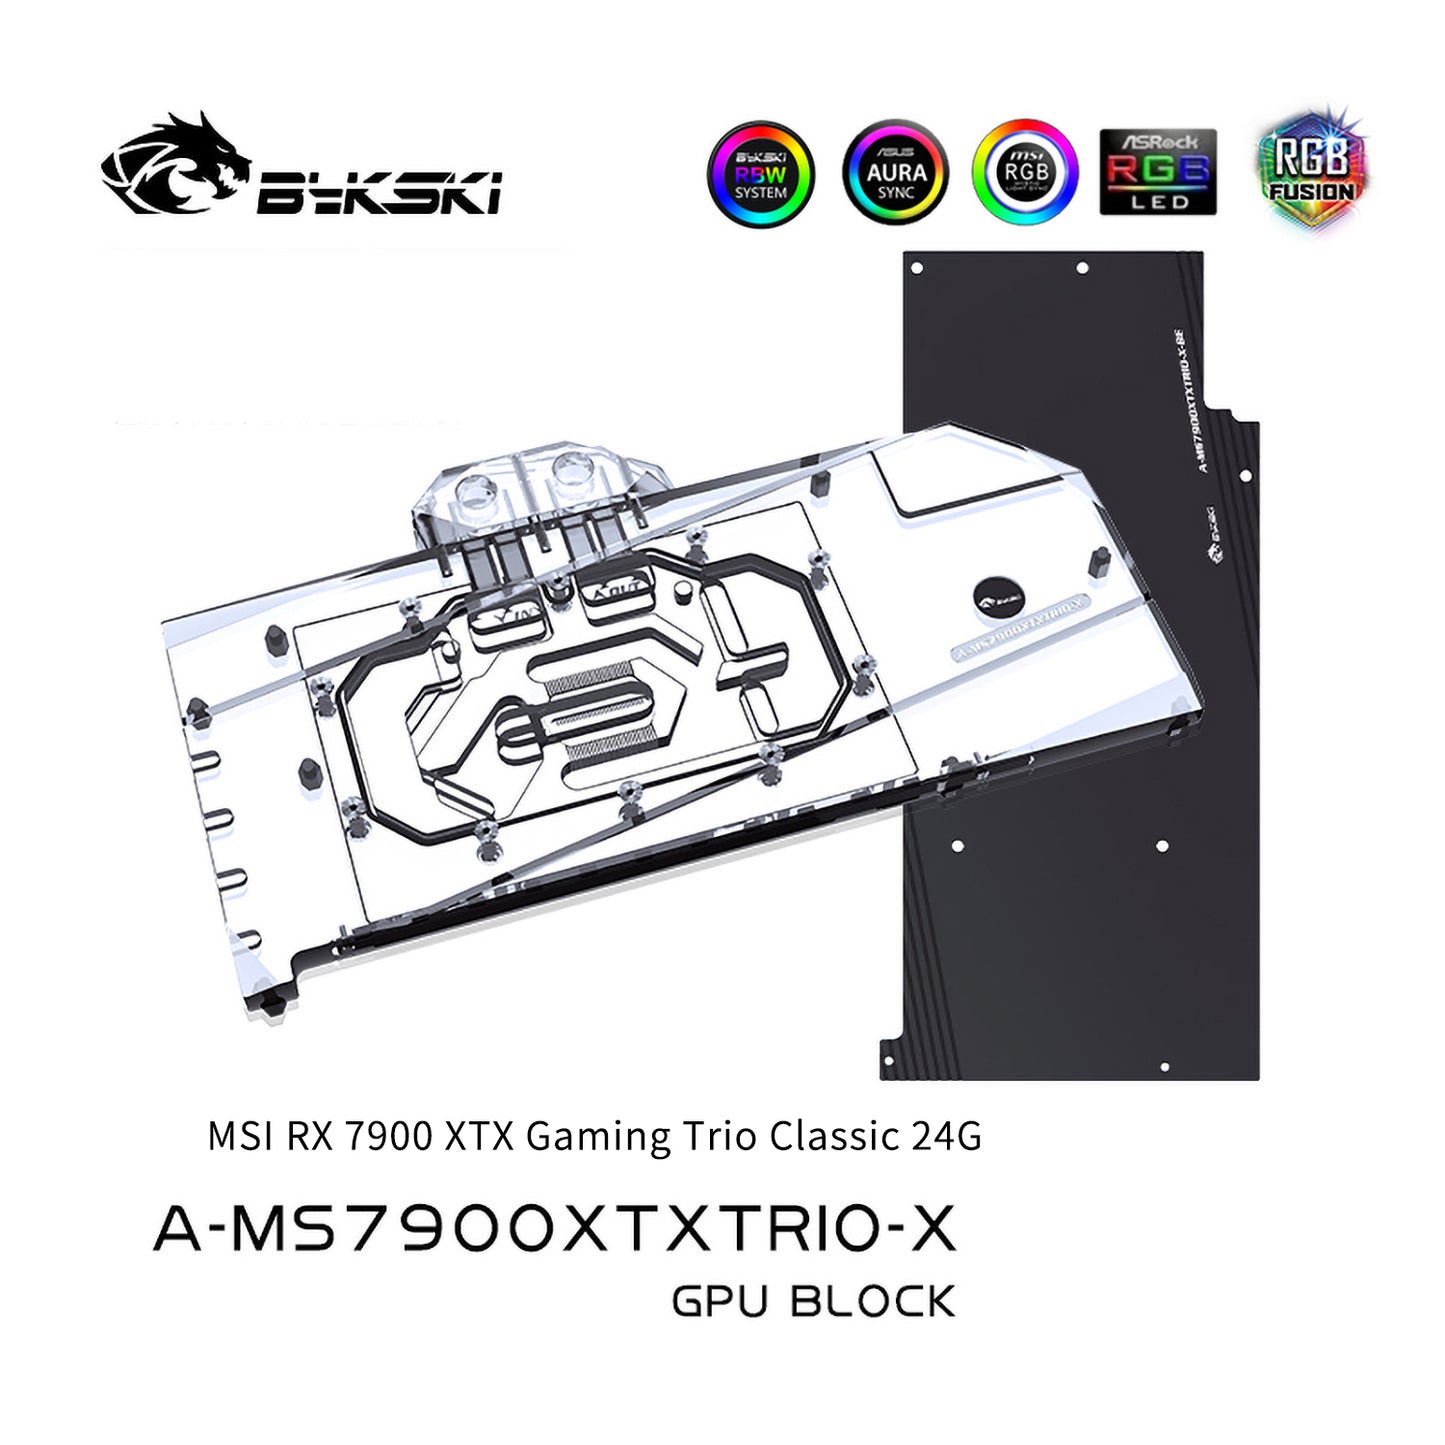 Bykski GPU Water Block For MSI RX 7900 XTX Gaming Trio Classic 24G, Full Cover With Backplate PC Water Cooling Cooler, A-MS7900XTXTRIO-X